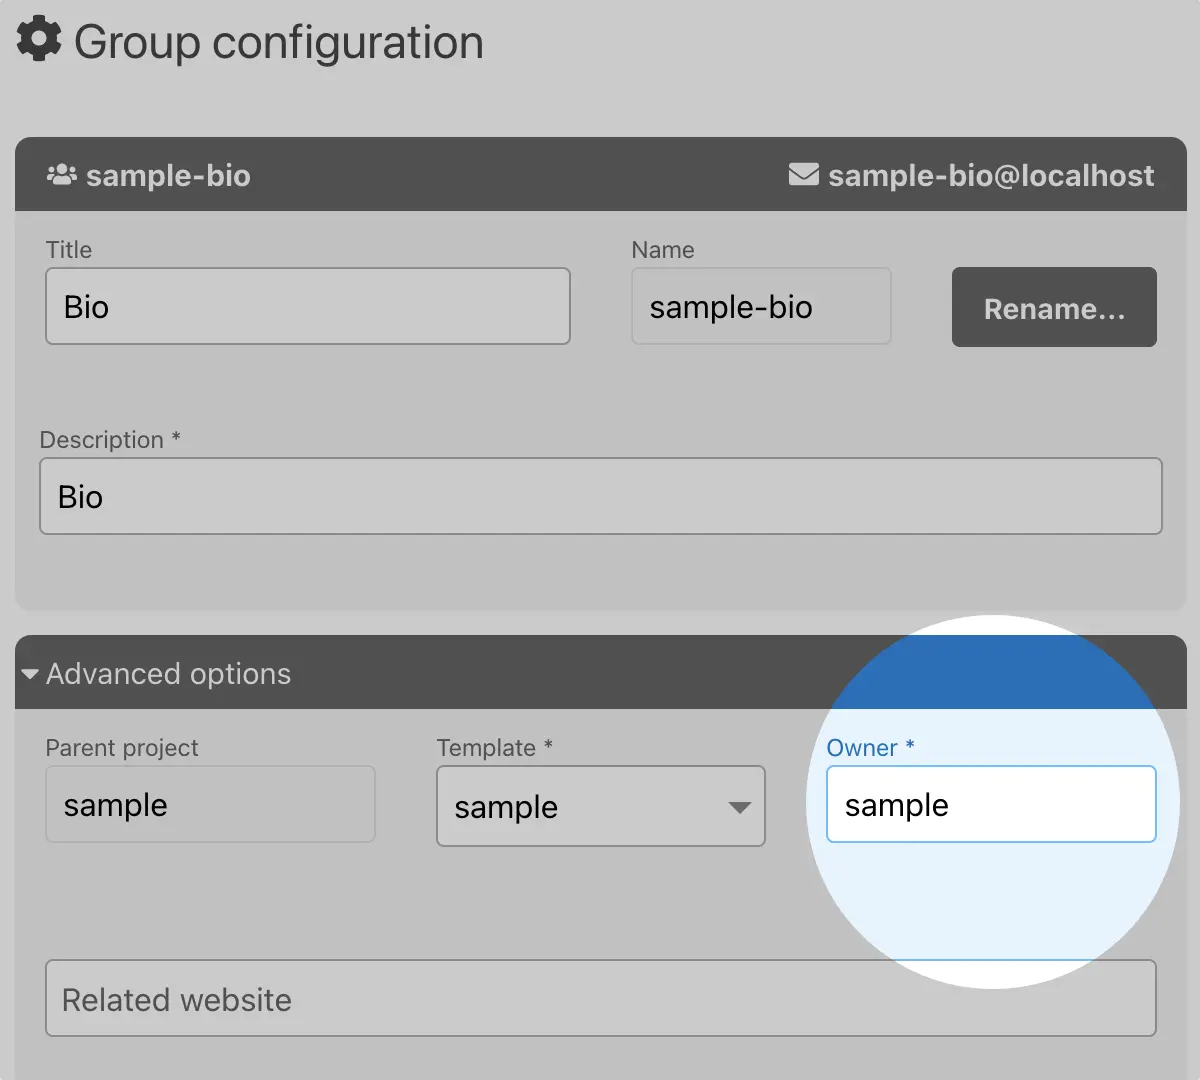 Group configuration – Owner